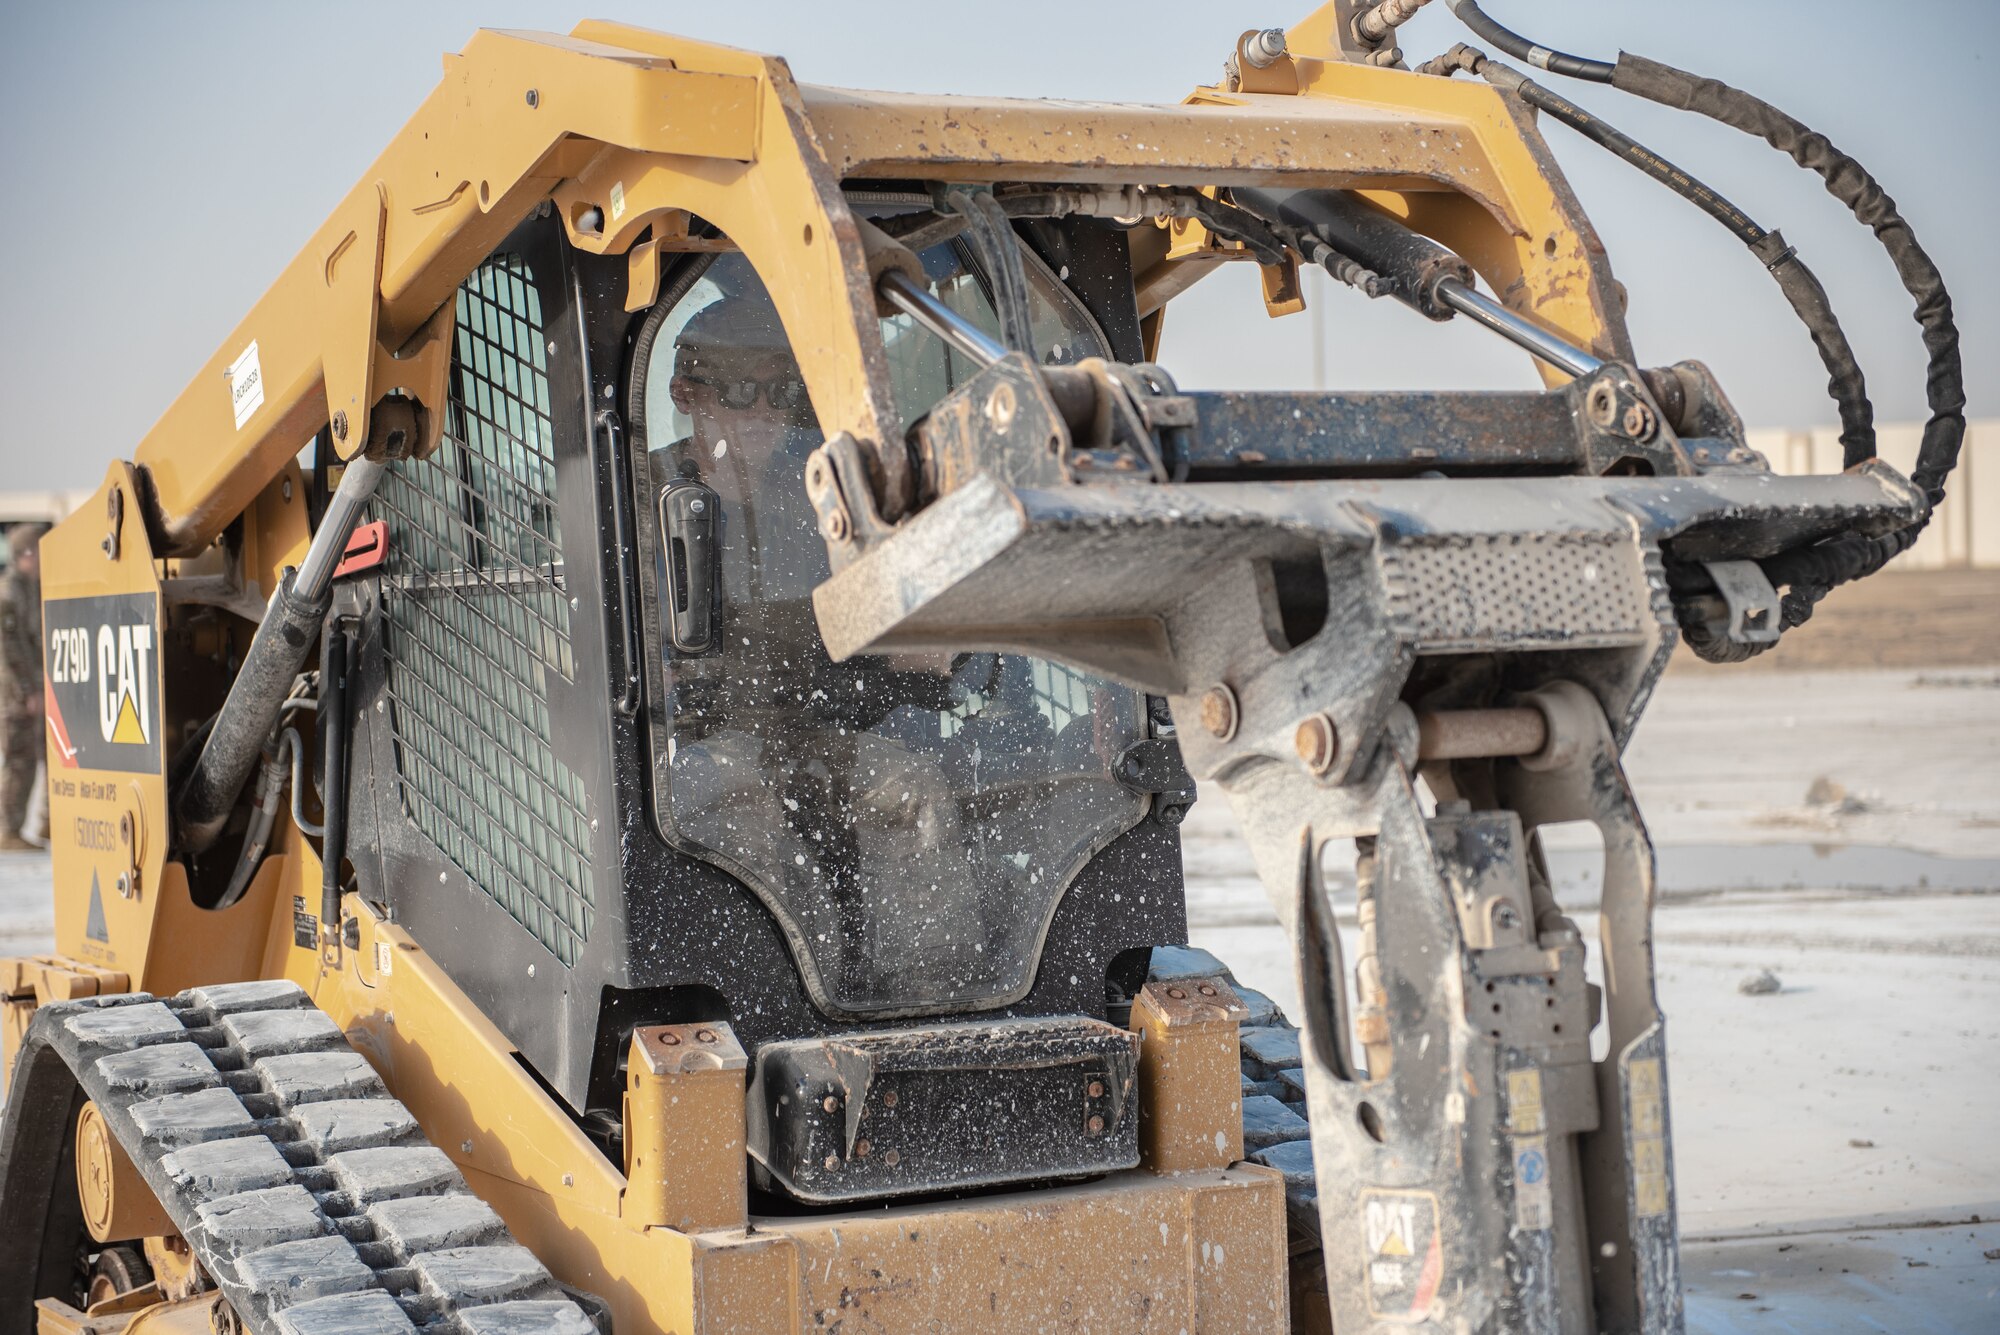 Airman 1st Class Louis Lamorgese, 380th Expeditionary Civil Engineer Squadron heavy machine operator, uses a compact track loader with a jackhammer attachment to break concrete during a rapid airfield damage repair exercise July 26, 2019, at Al Dhafra Air Base, United Arab Emirates. After breaking the concrete apart, an excavator can remove the debris allowing the remaining hole to be filled with fast-curing concrete. (U.S. Air Force photo by Staff Sgt. Chris Thornbury)